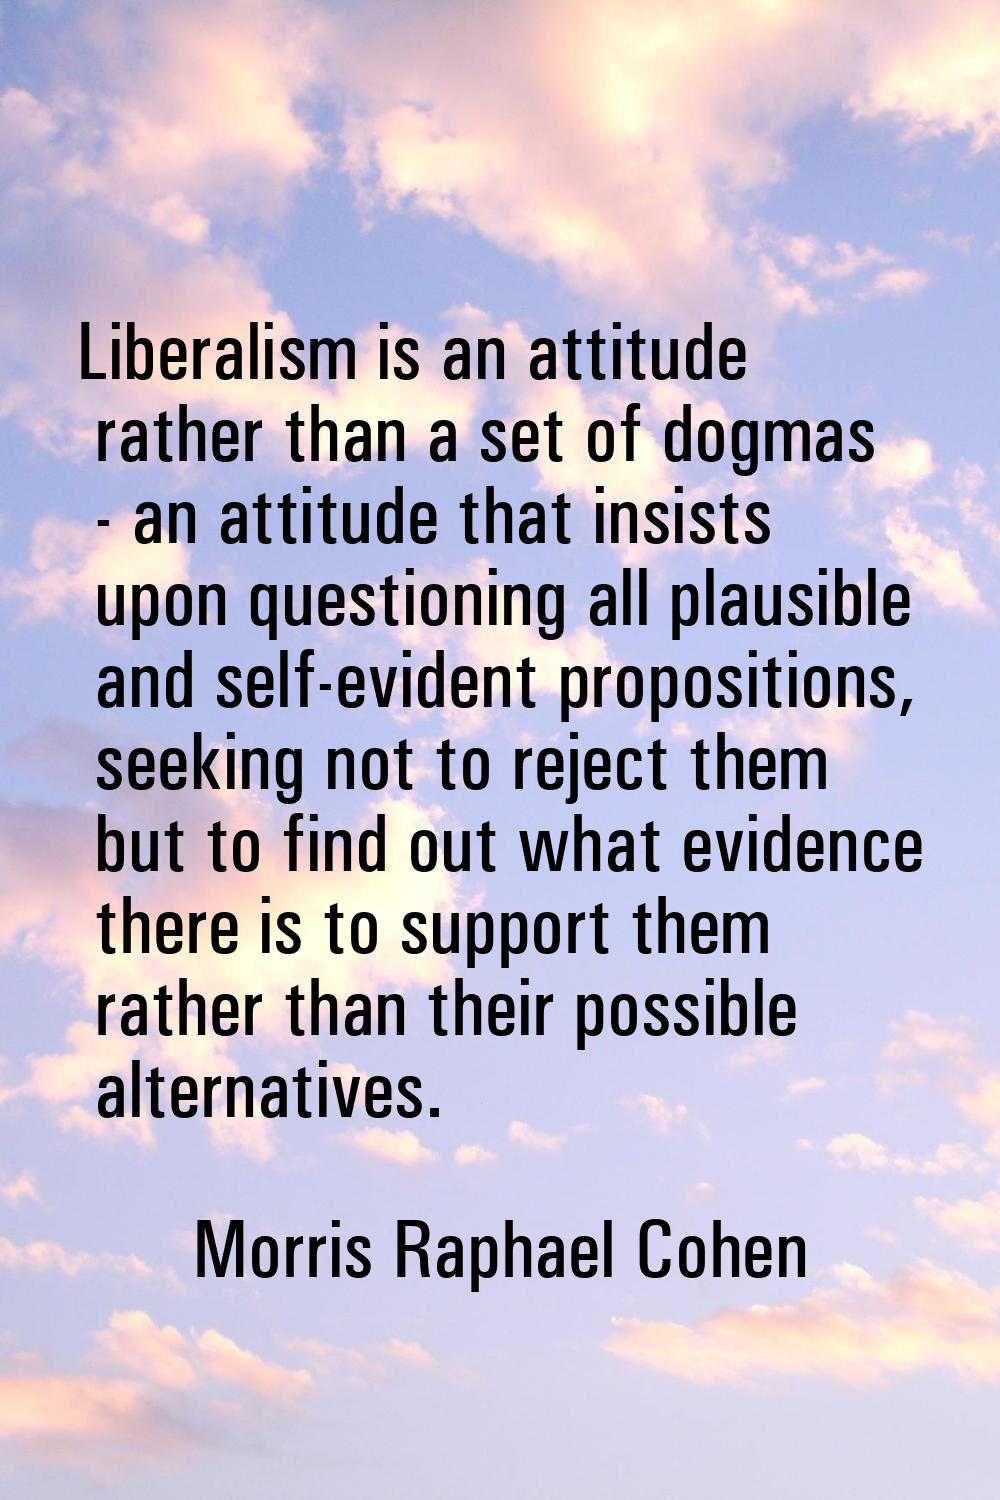 Liberalism is an attitude rather than a set of dogmas - an attitude that insists upon questioning a